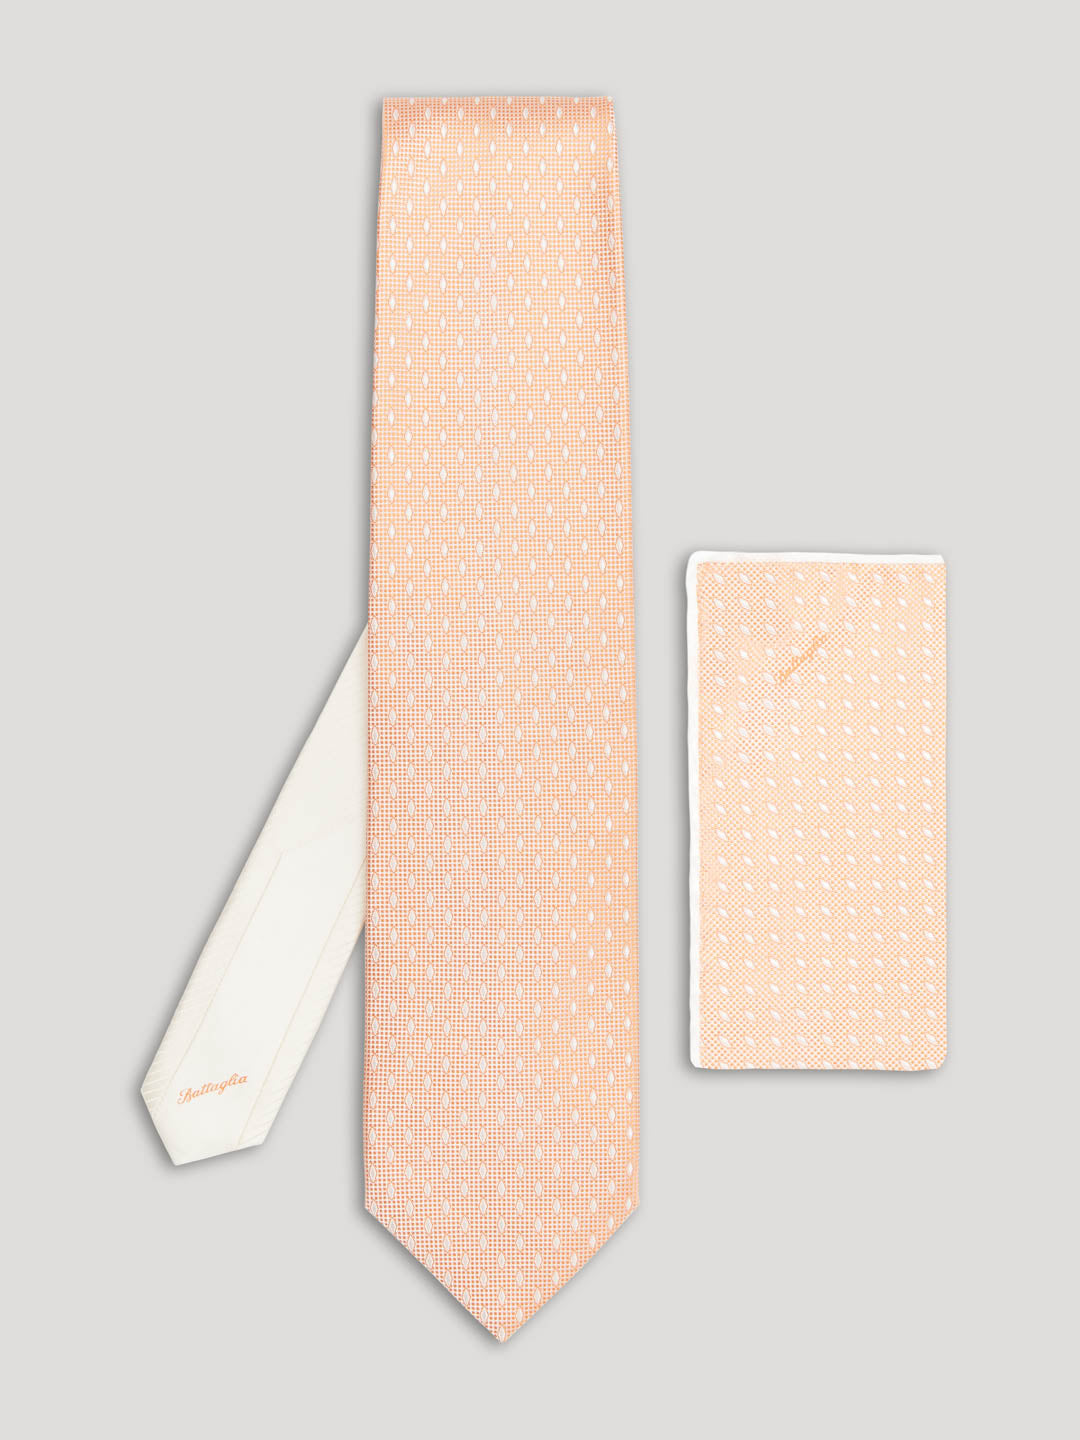 Peach tie with white diamond details on it and matching handkerchief. 